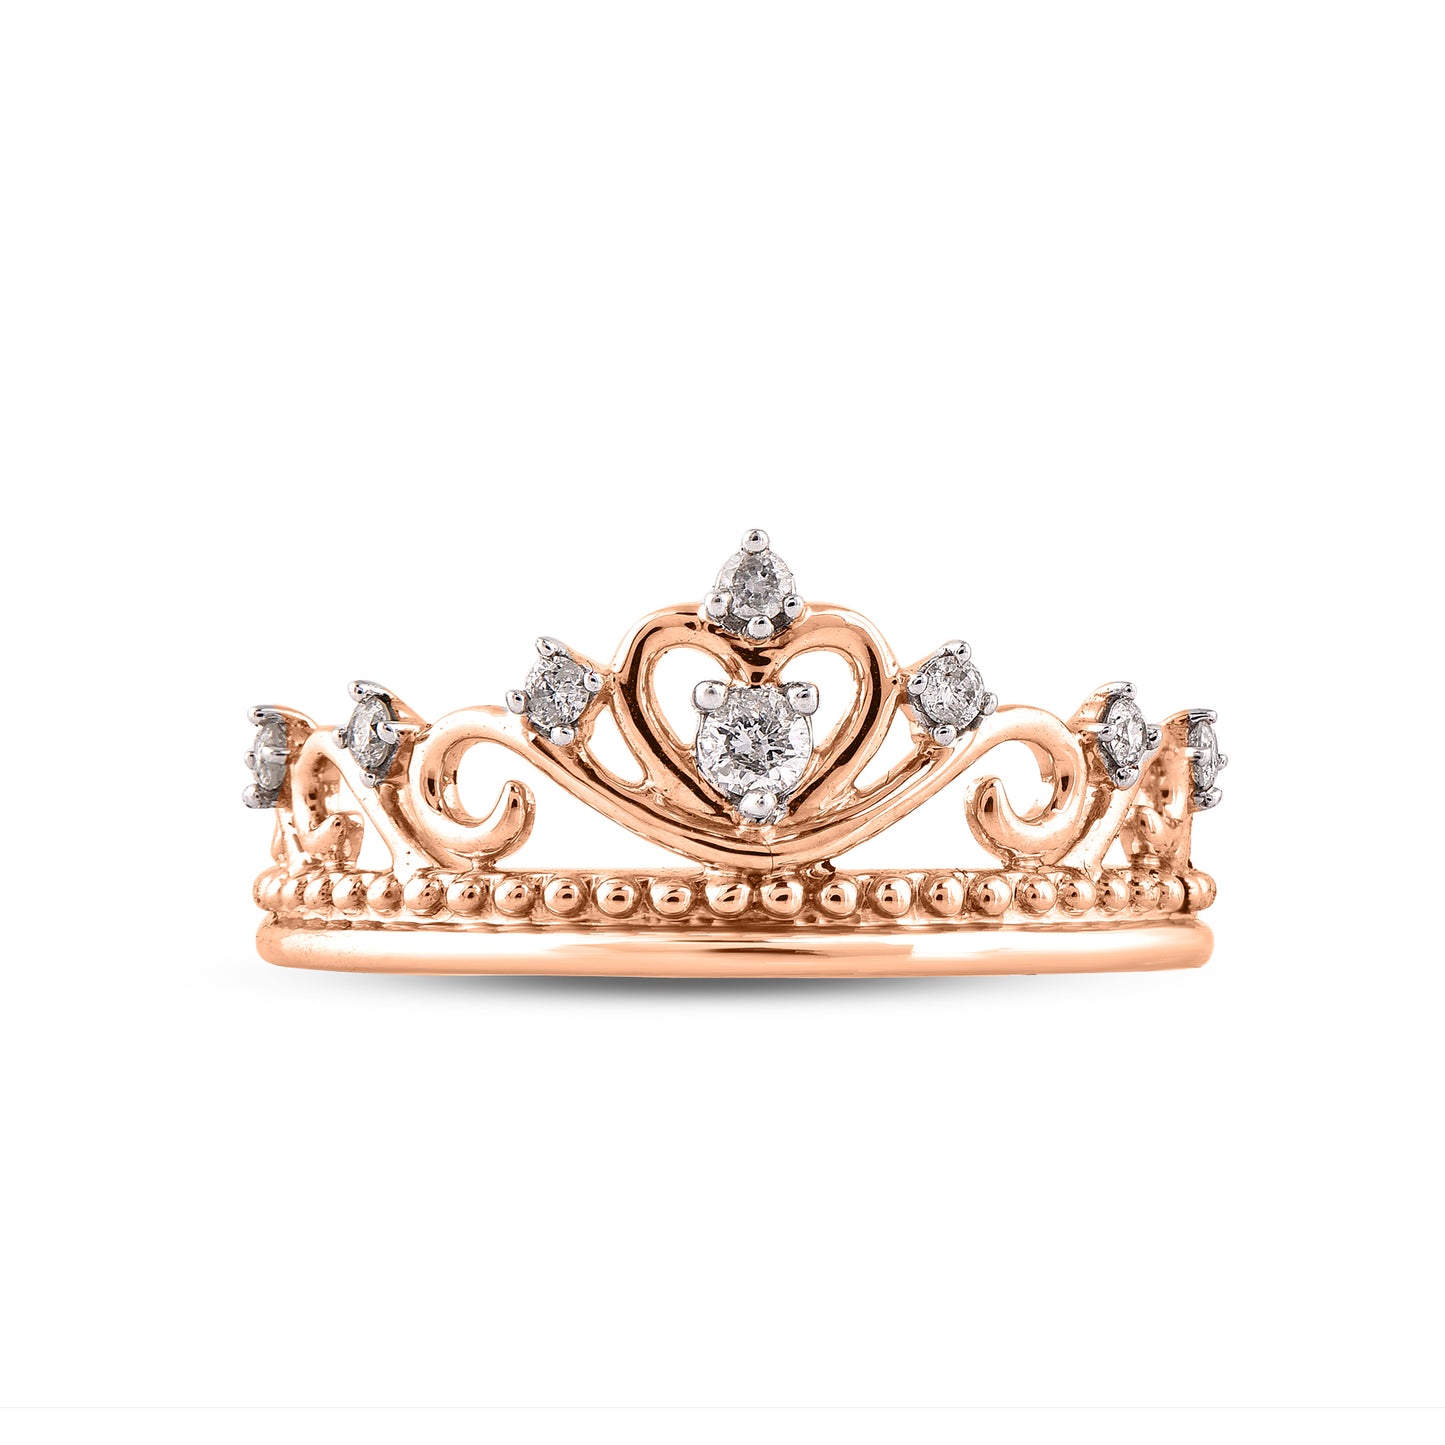 Tiara Propose Ring in Gold Plated 925 Sterling Silver